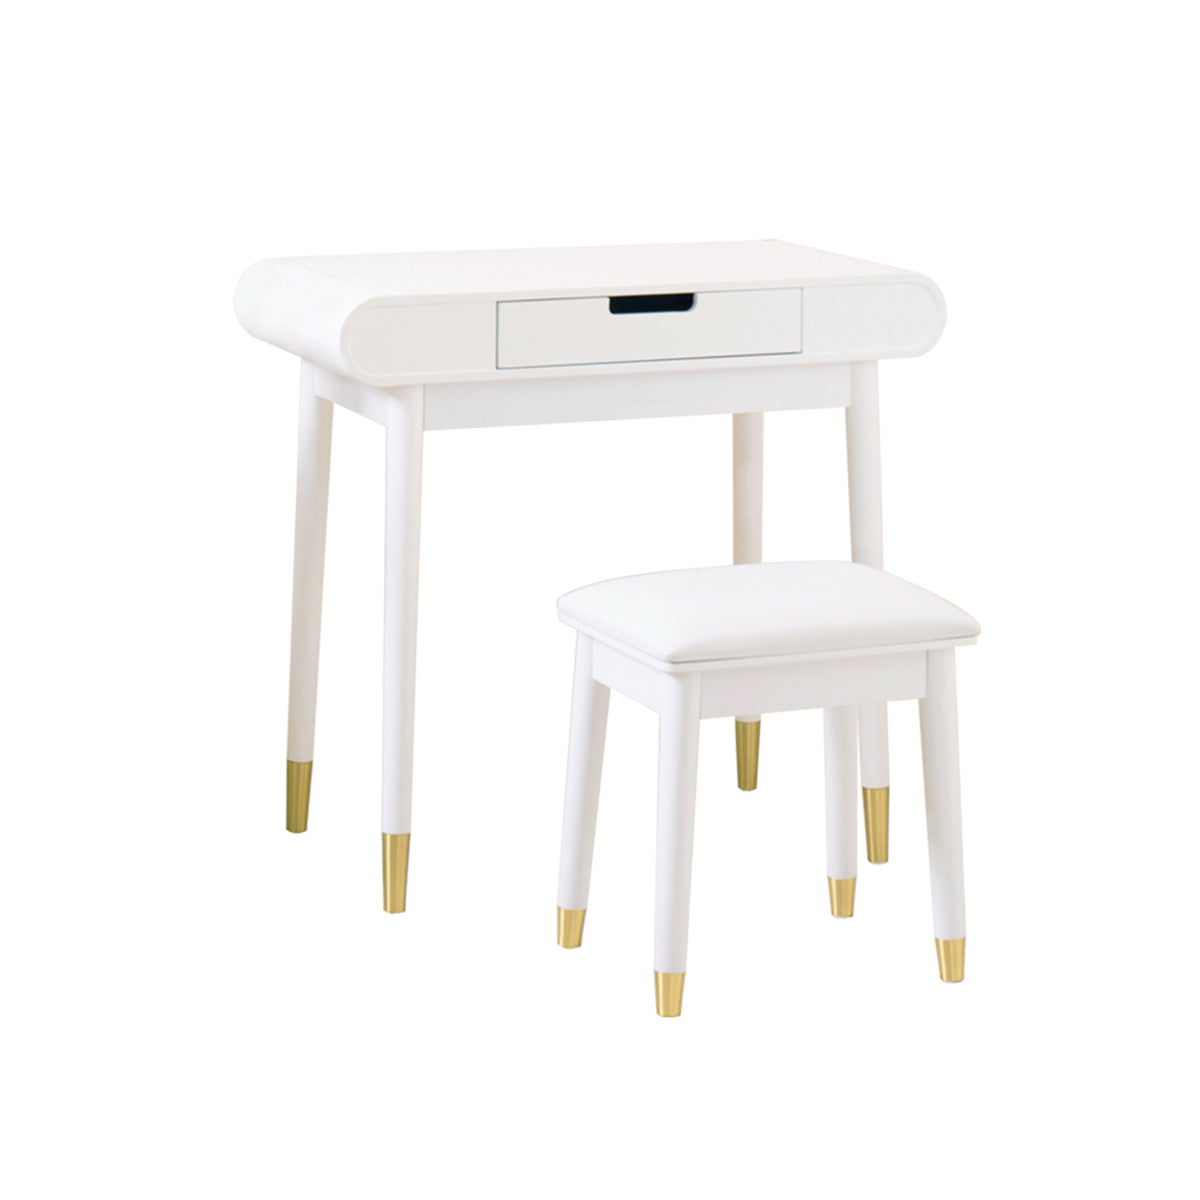 White Desk or Makeup Vanity Set with Stool, High Gloss Finish Dressing Table with Solid Stool (without Mirror)